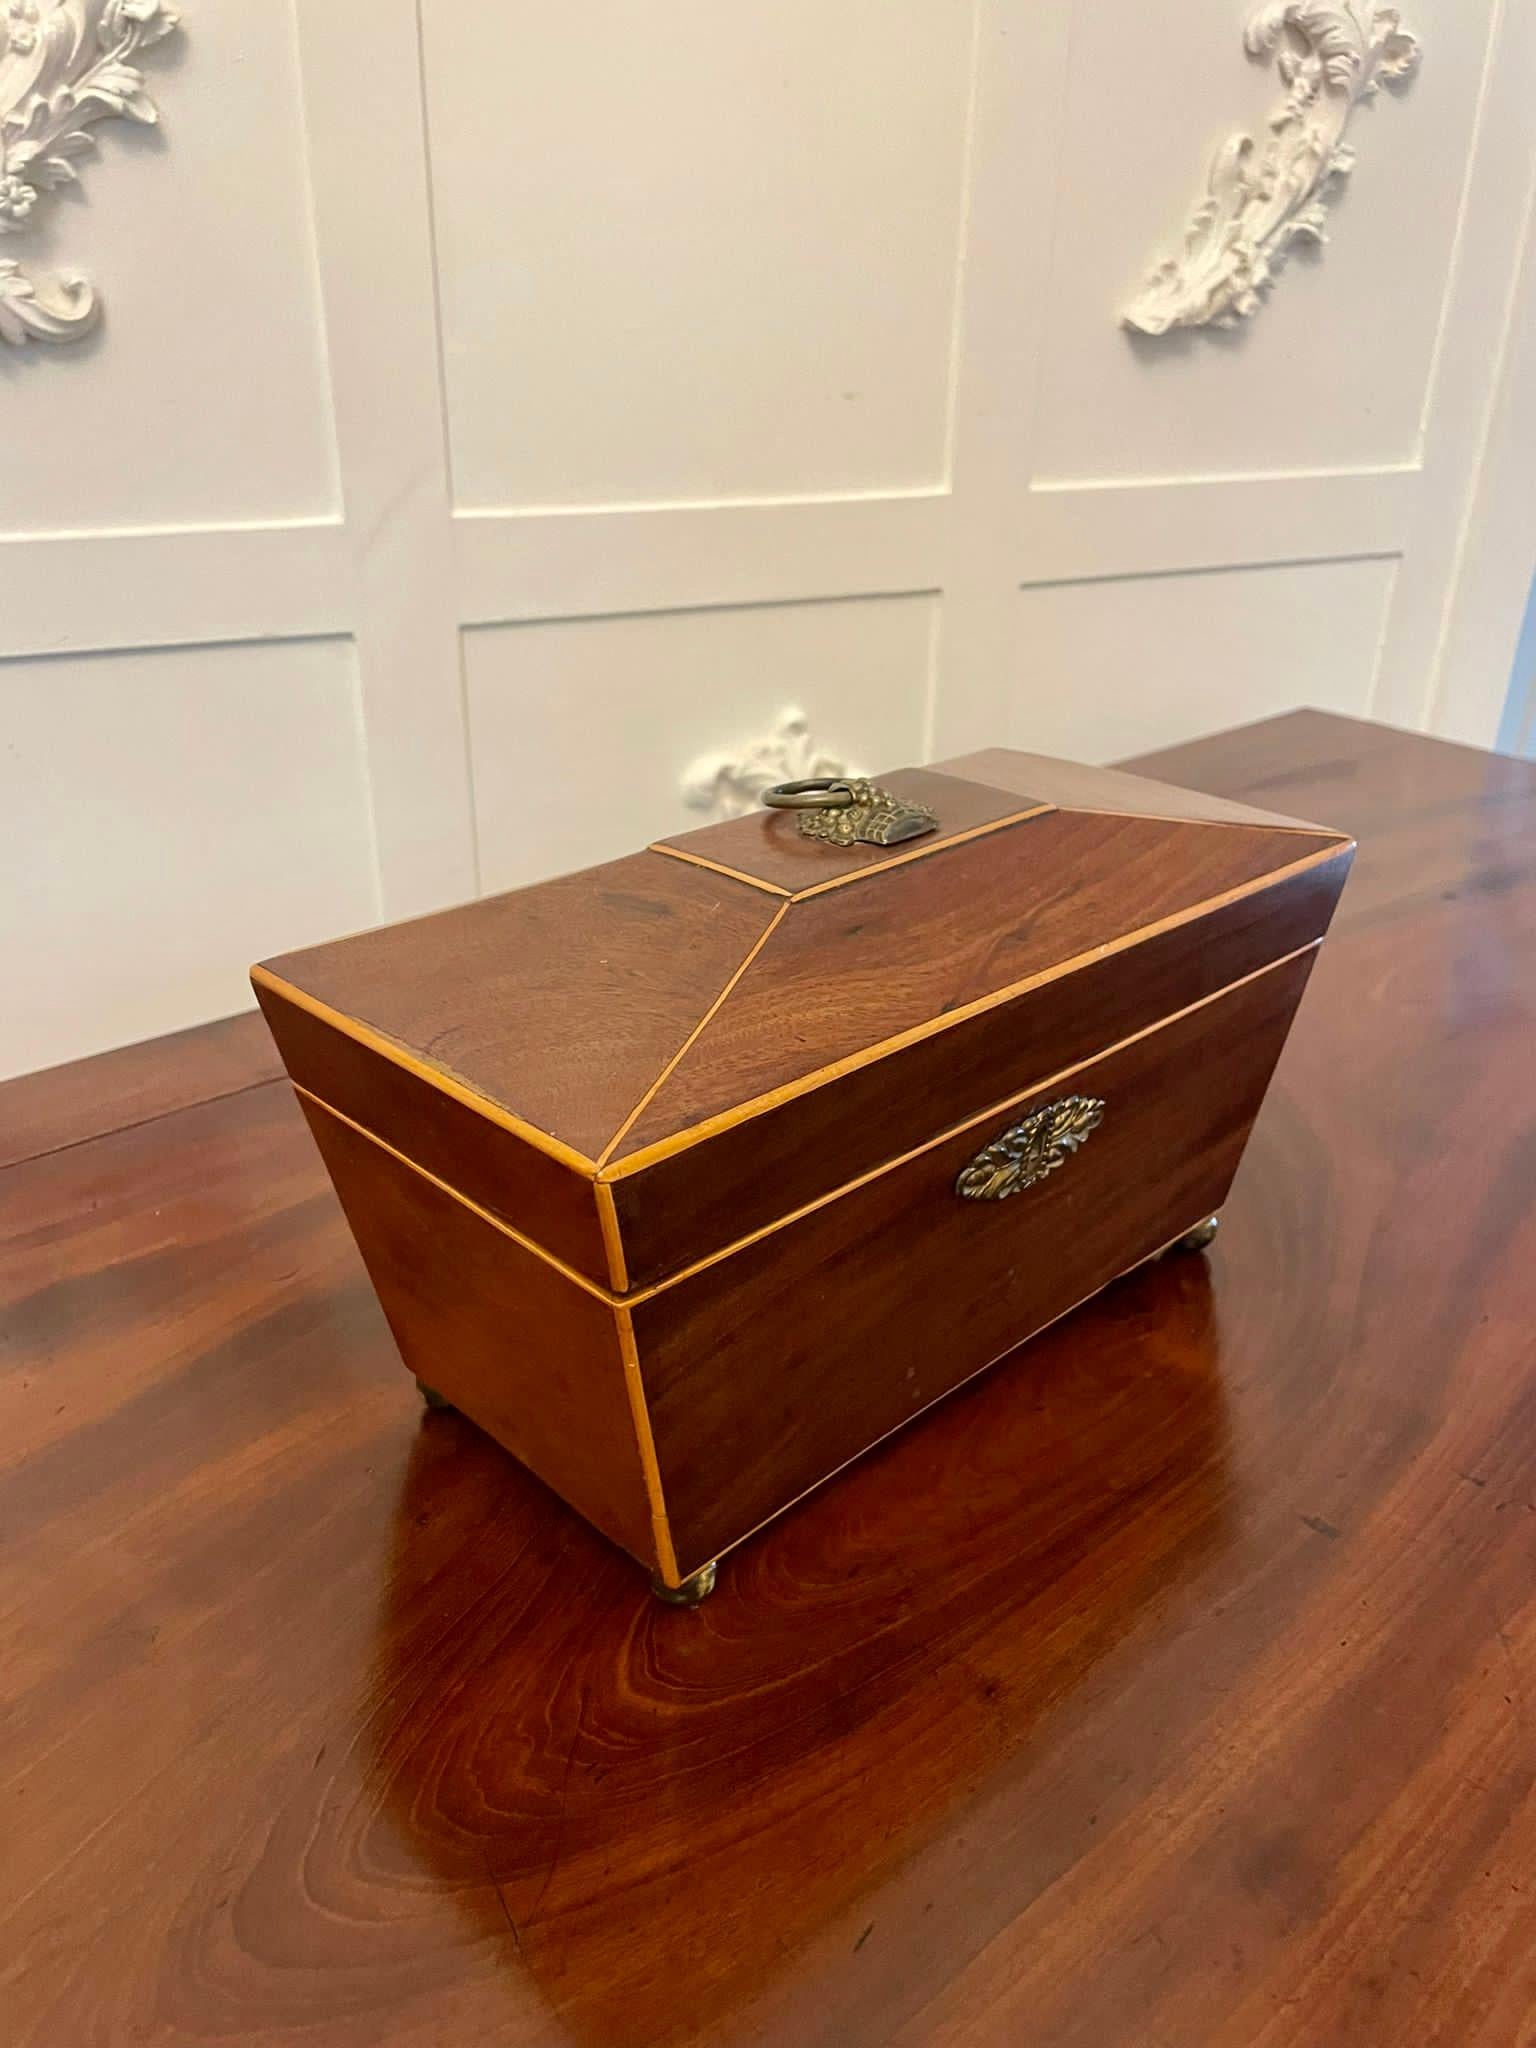 Other Antique Regency Quality Mahogany Inlaid Tea Caddy For Sale